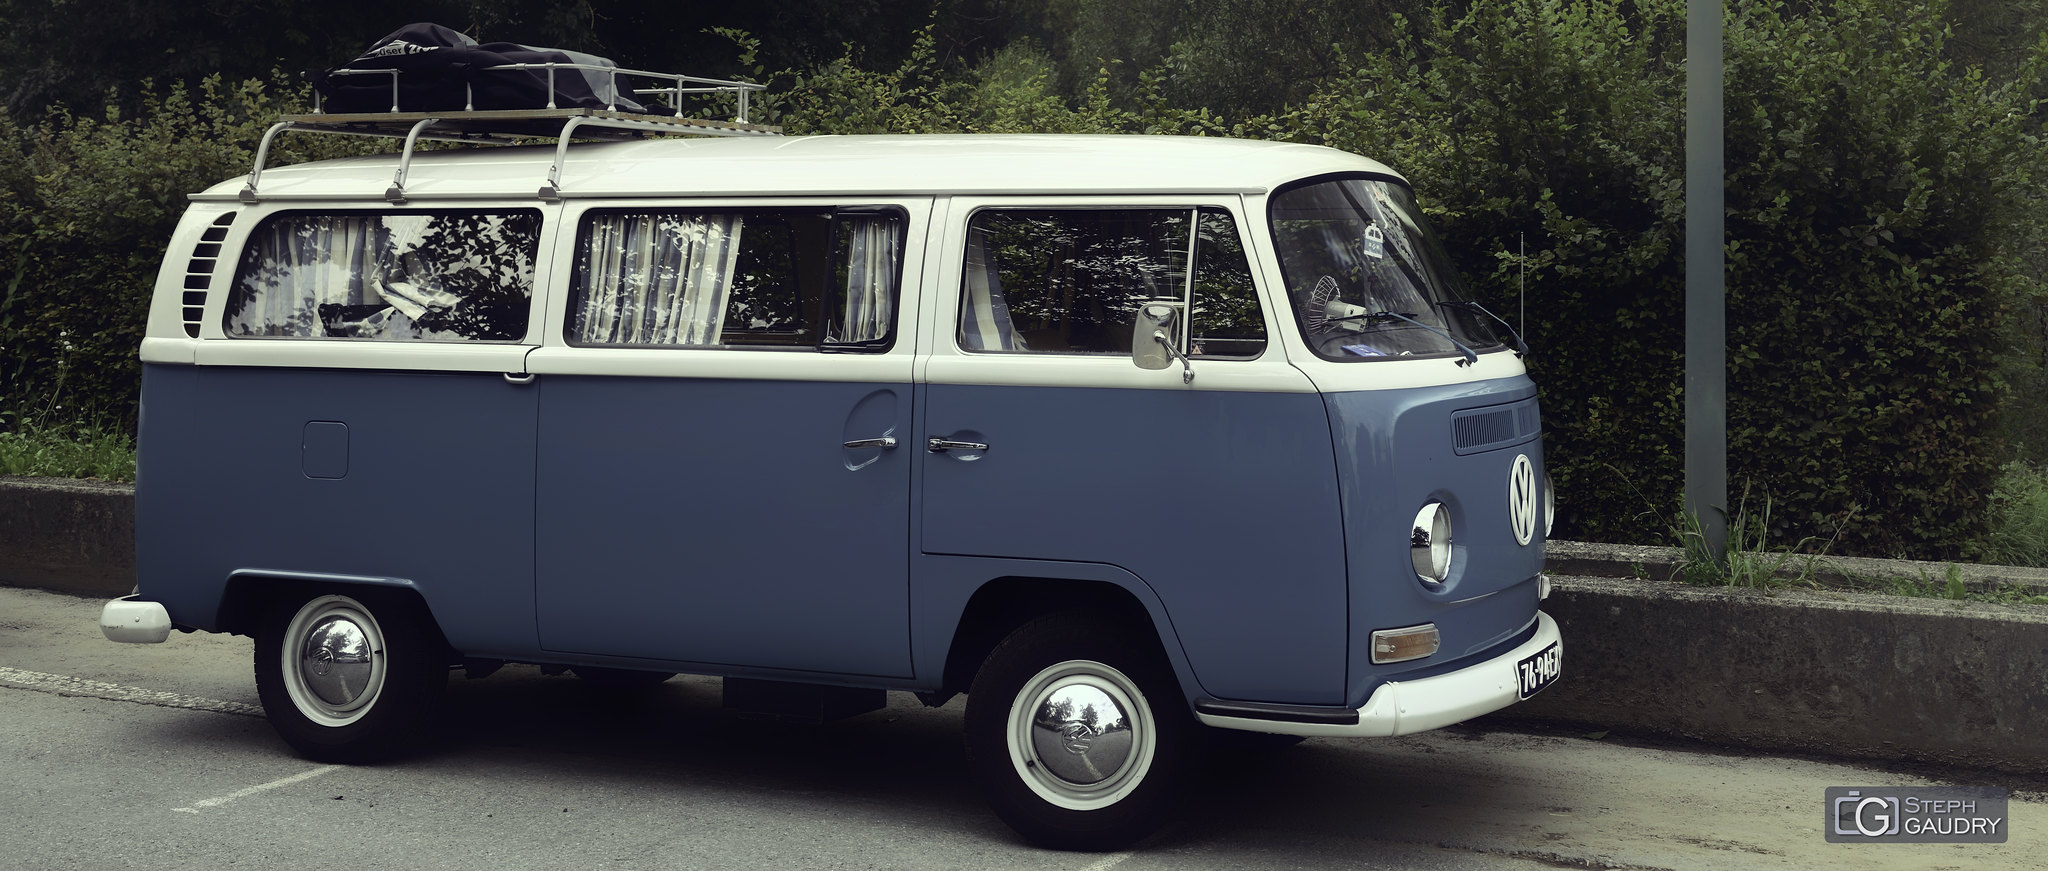 Mullerthal trail (LUX) / VW combi T2